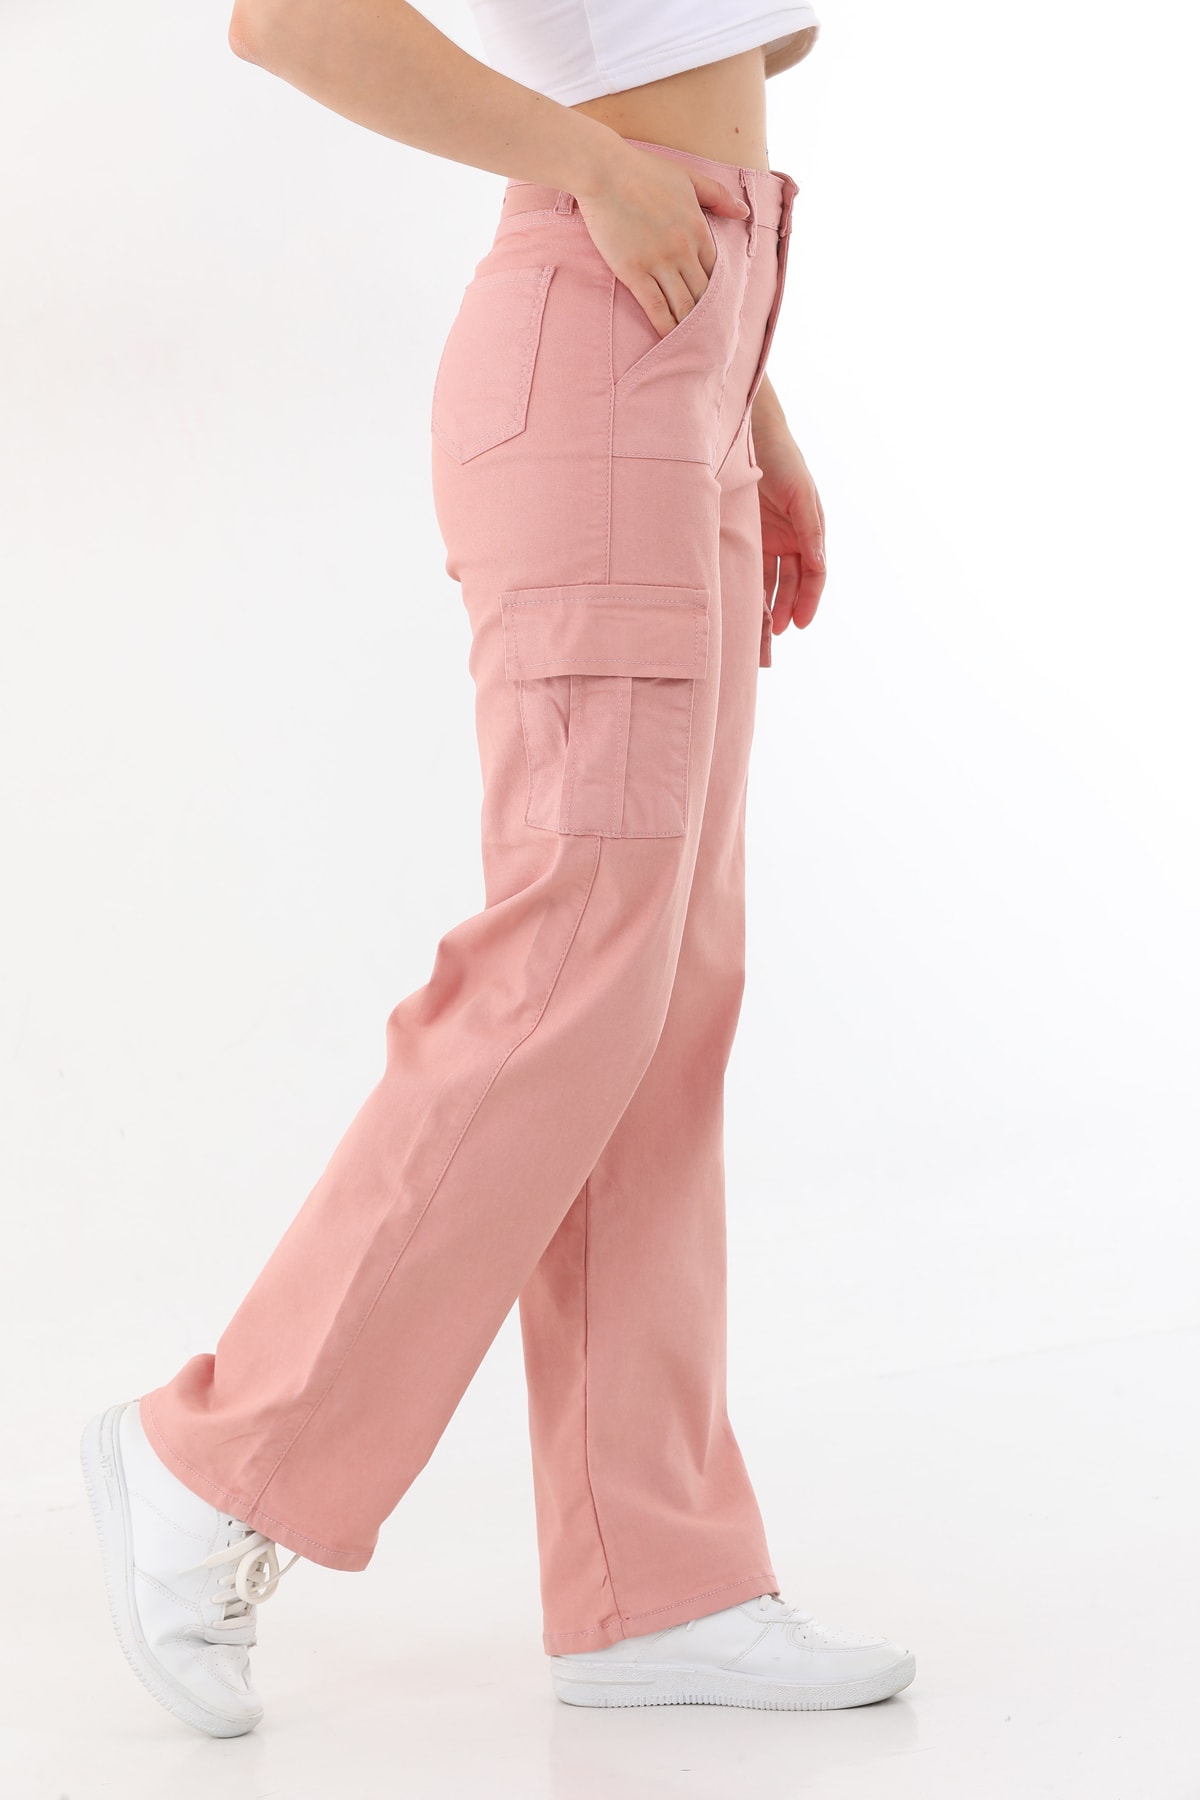 Discover more than 134 neon pink cargo trousers super hot - camera.edu.vn